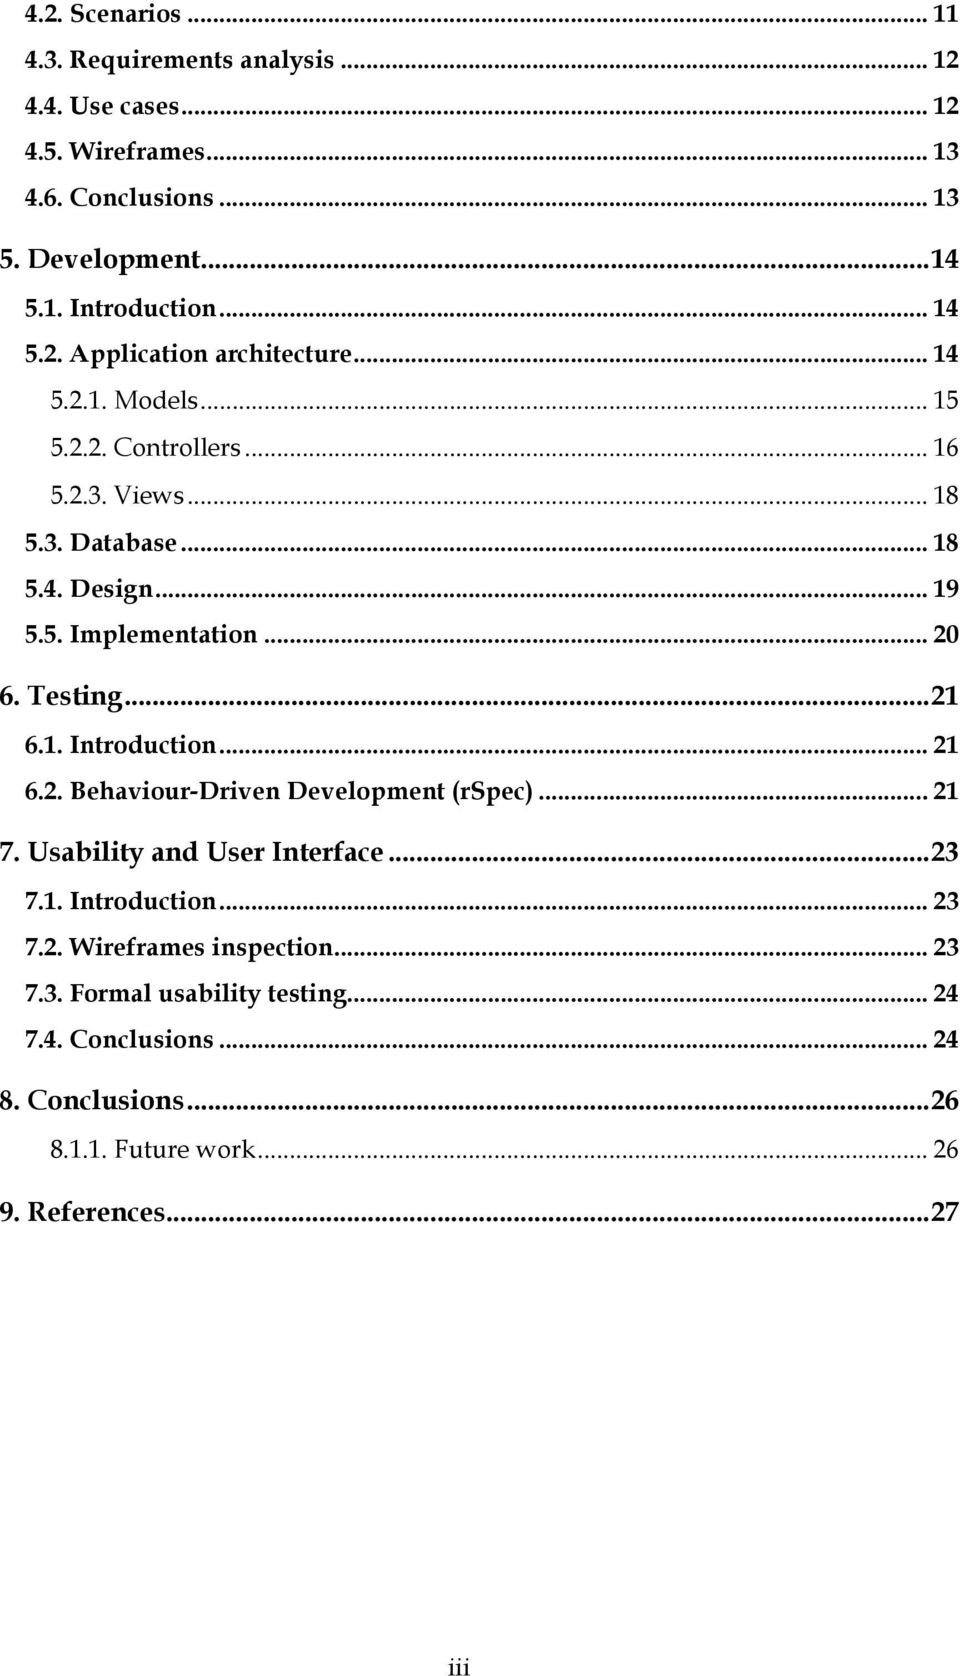 .. 20 6. Testing... 21 6.1. Introduction... 21 6.2. Behaviour-Driven Development (rspec)... 21 7. Usability and User Interface... 23 7.1. Introduction... 23 7.2. Wireframes inspection.